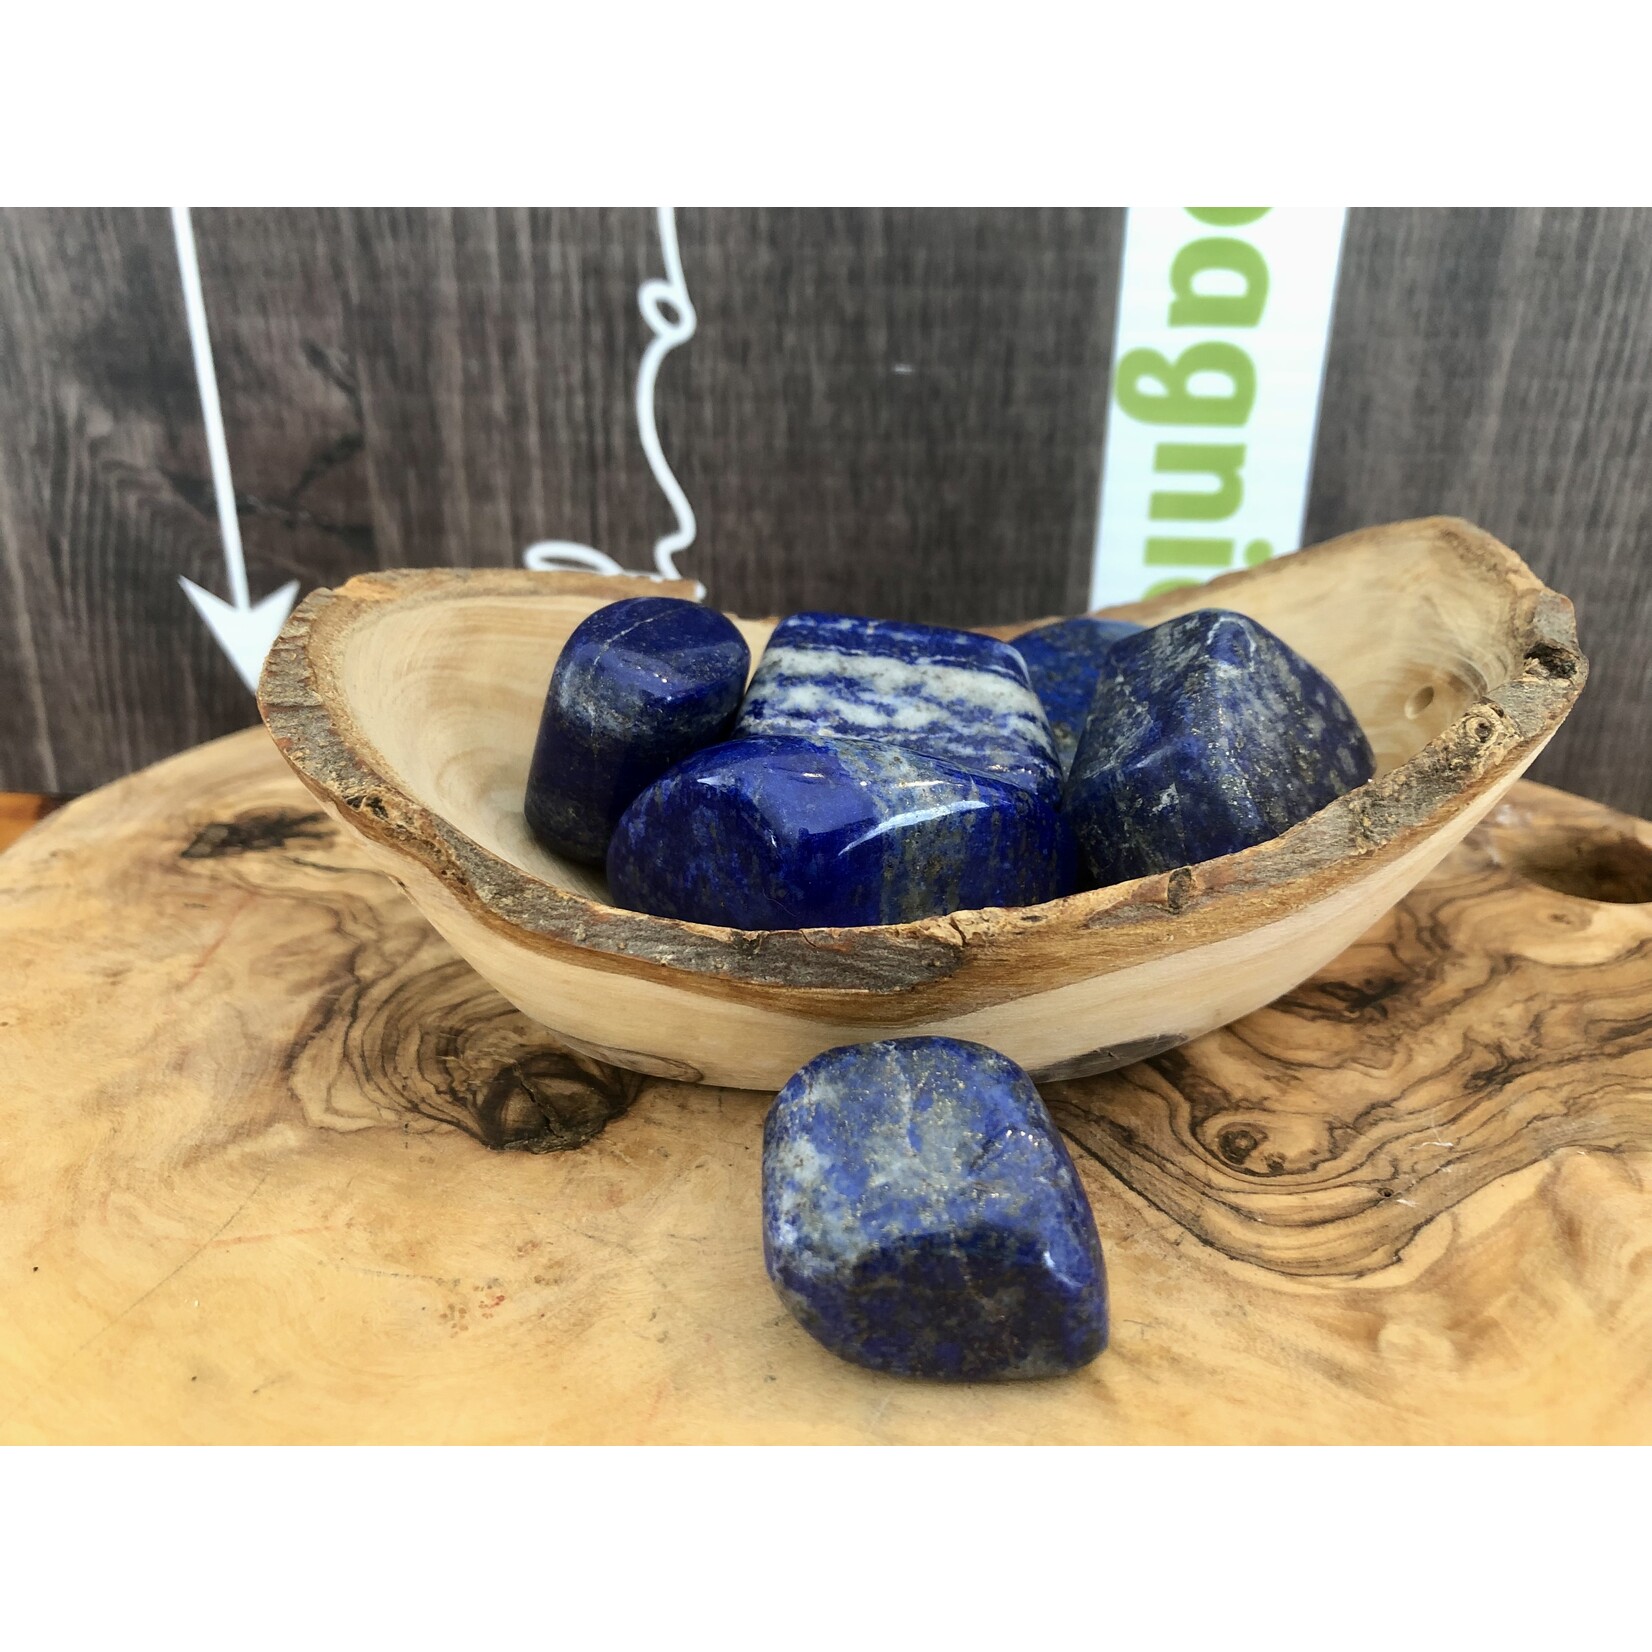 Select Lapis Lazuli Tumbled Stone -Premium Quality for Migraine Relief and Calming Anxiety